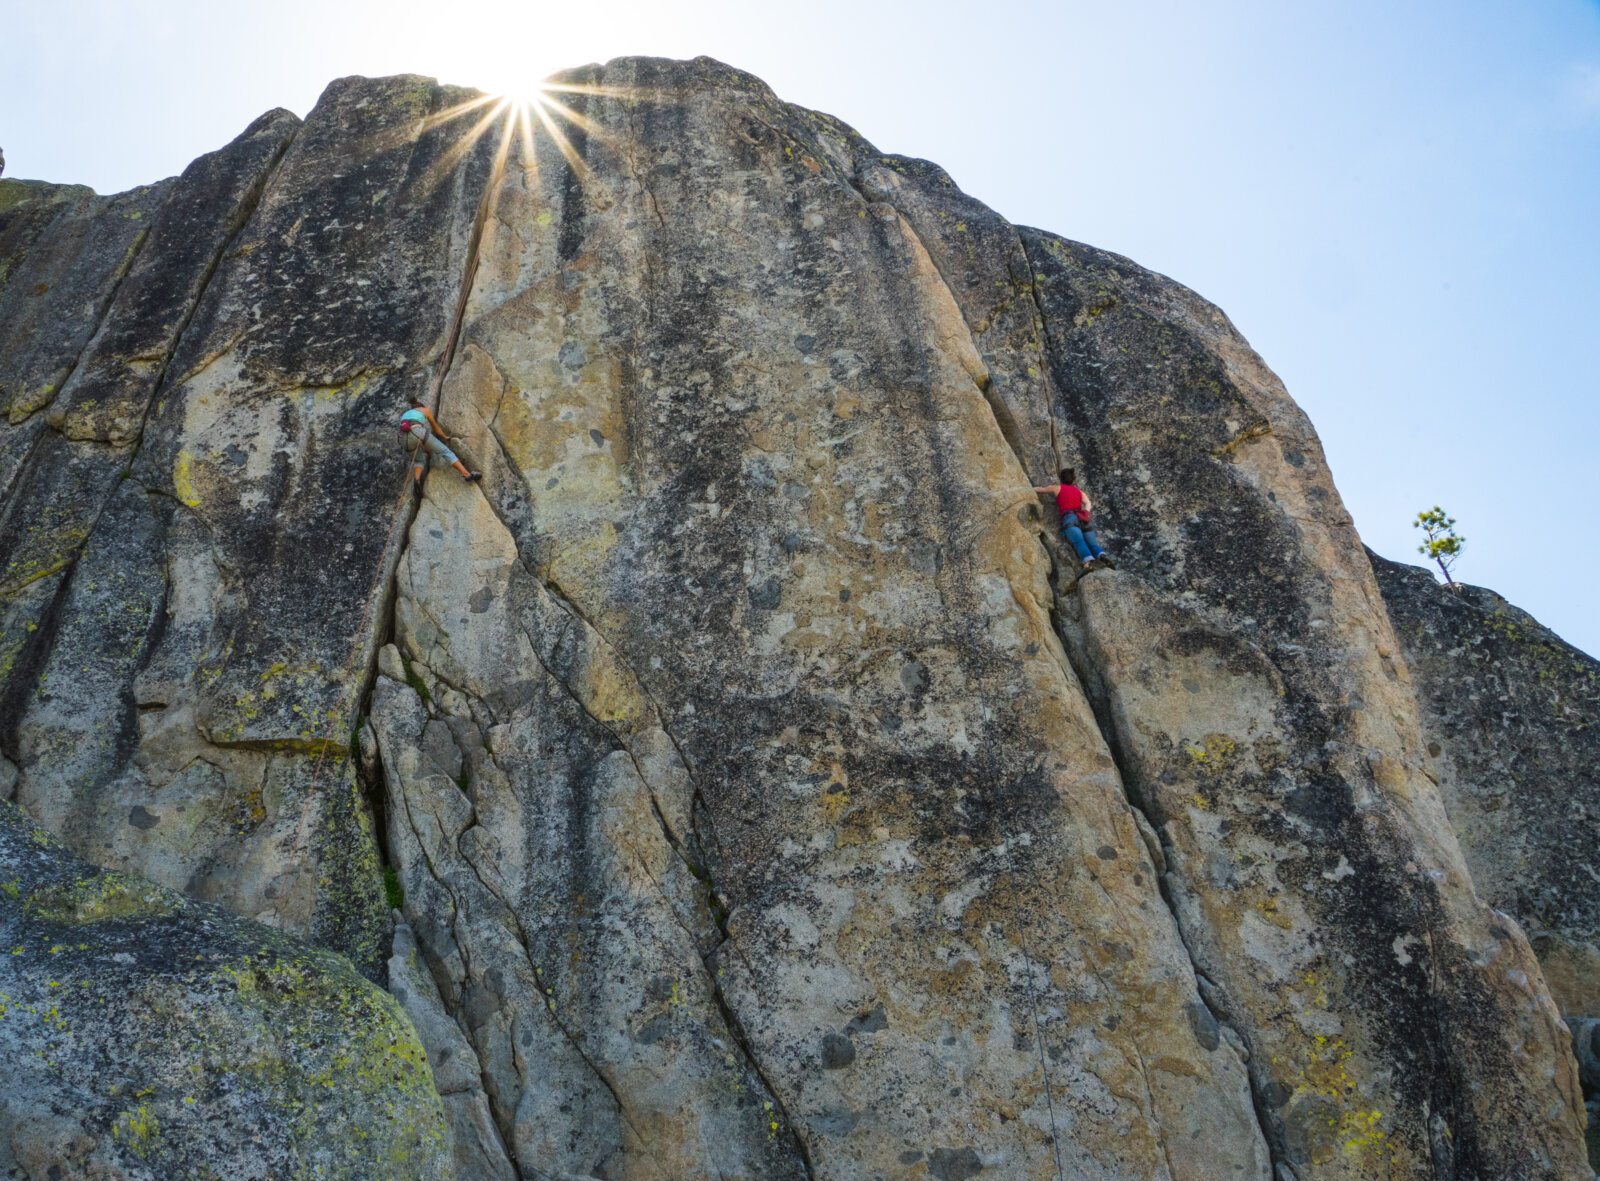 A private full day of rock climbing with Alpenglow allows you to name the dates and location for your day with one of our AMGA certified rock guides. Give us a call to start planning your dream adventure in California.